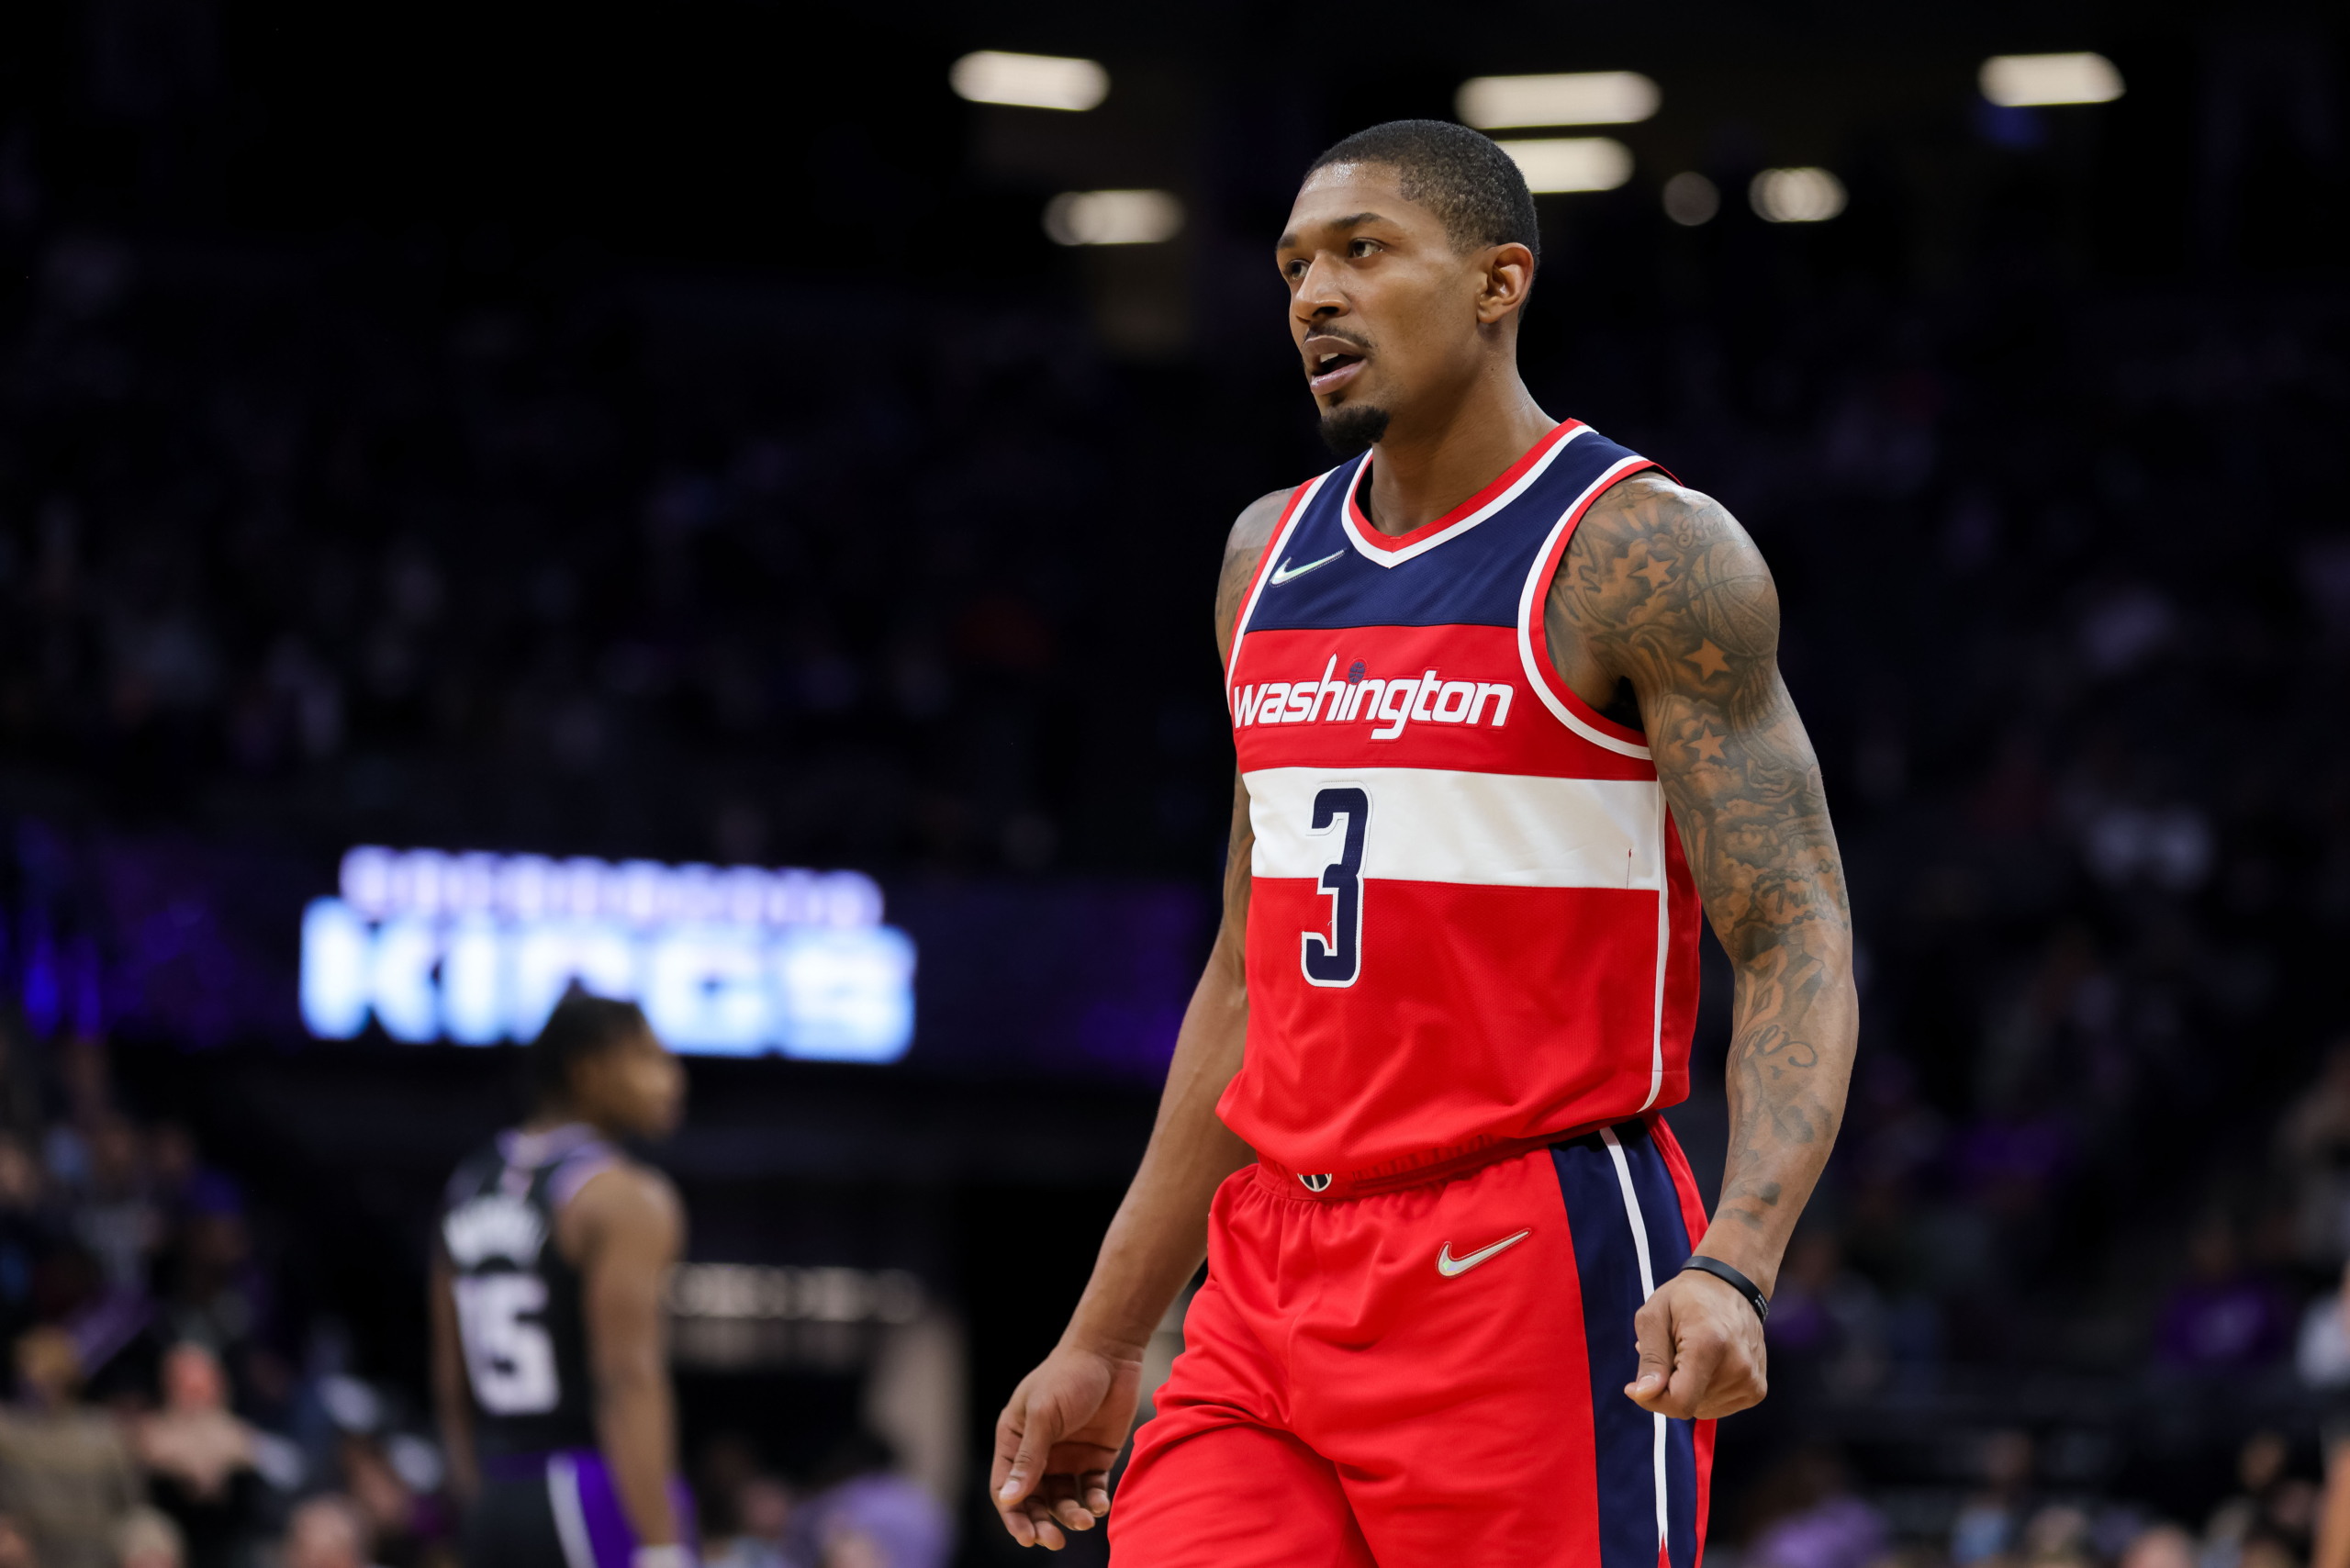 Wizards working with Bradley Beal's agent on possible trade: report